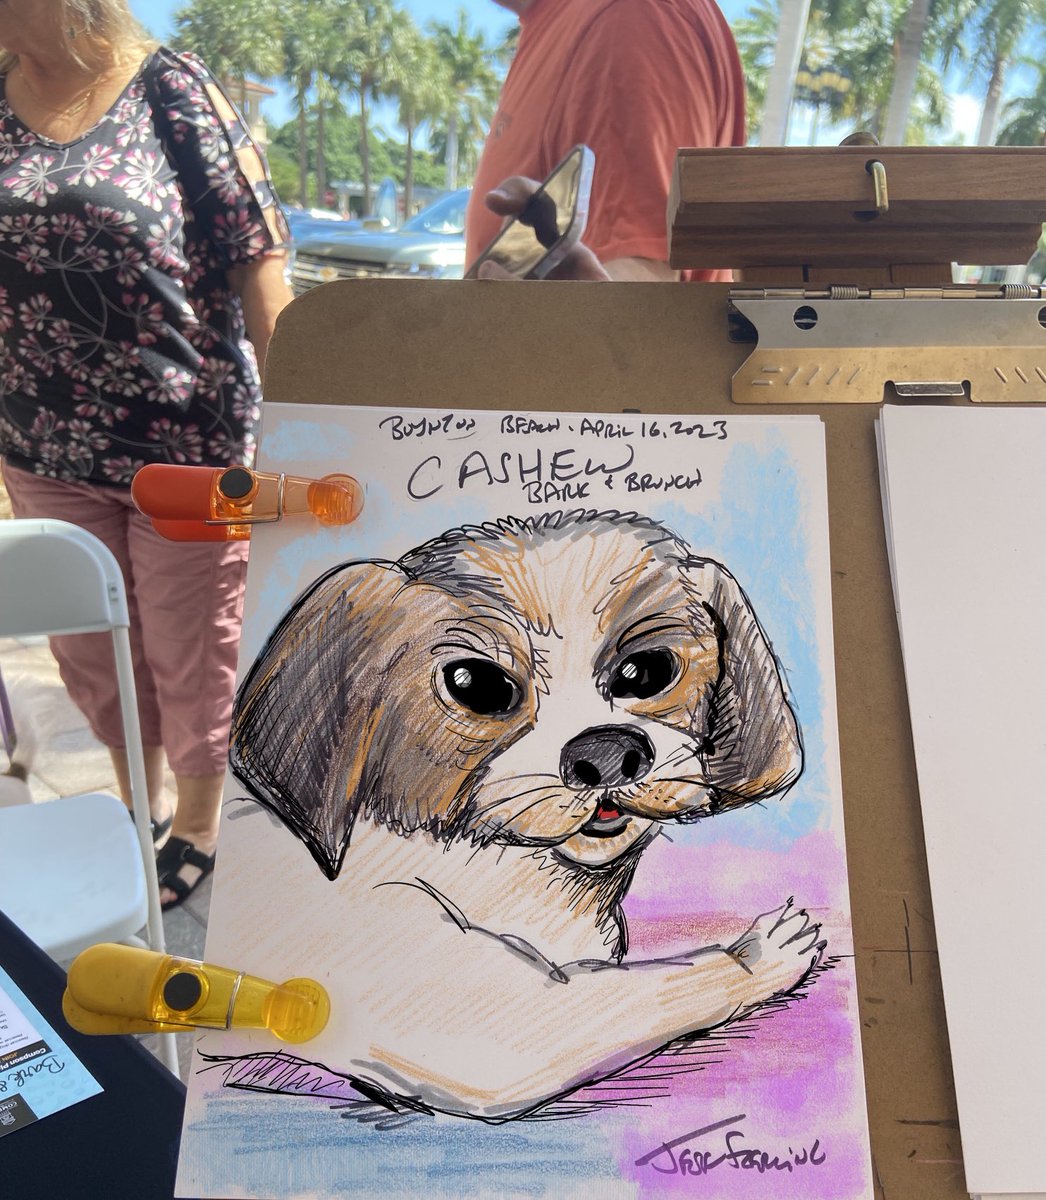 #DogOwners #PetOwners #CommunityEvent 'Bark & Brunch' in #BoyntonBeach #PalmBeachCountyFlorida included #PetCaricatures #DogCaricatures by #DelrayBeach and #MiamiCaricatureArtist Jeff Sterling from FloridaCaricatures.Com